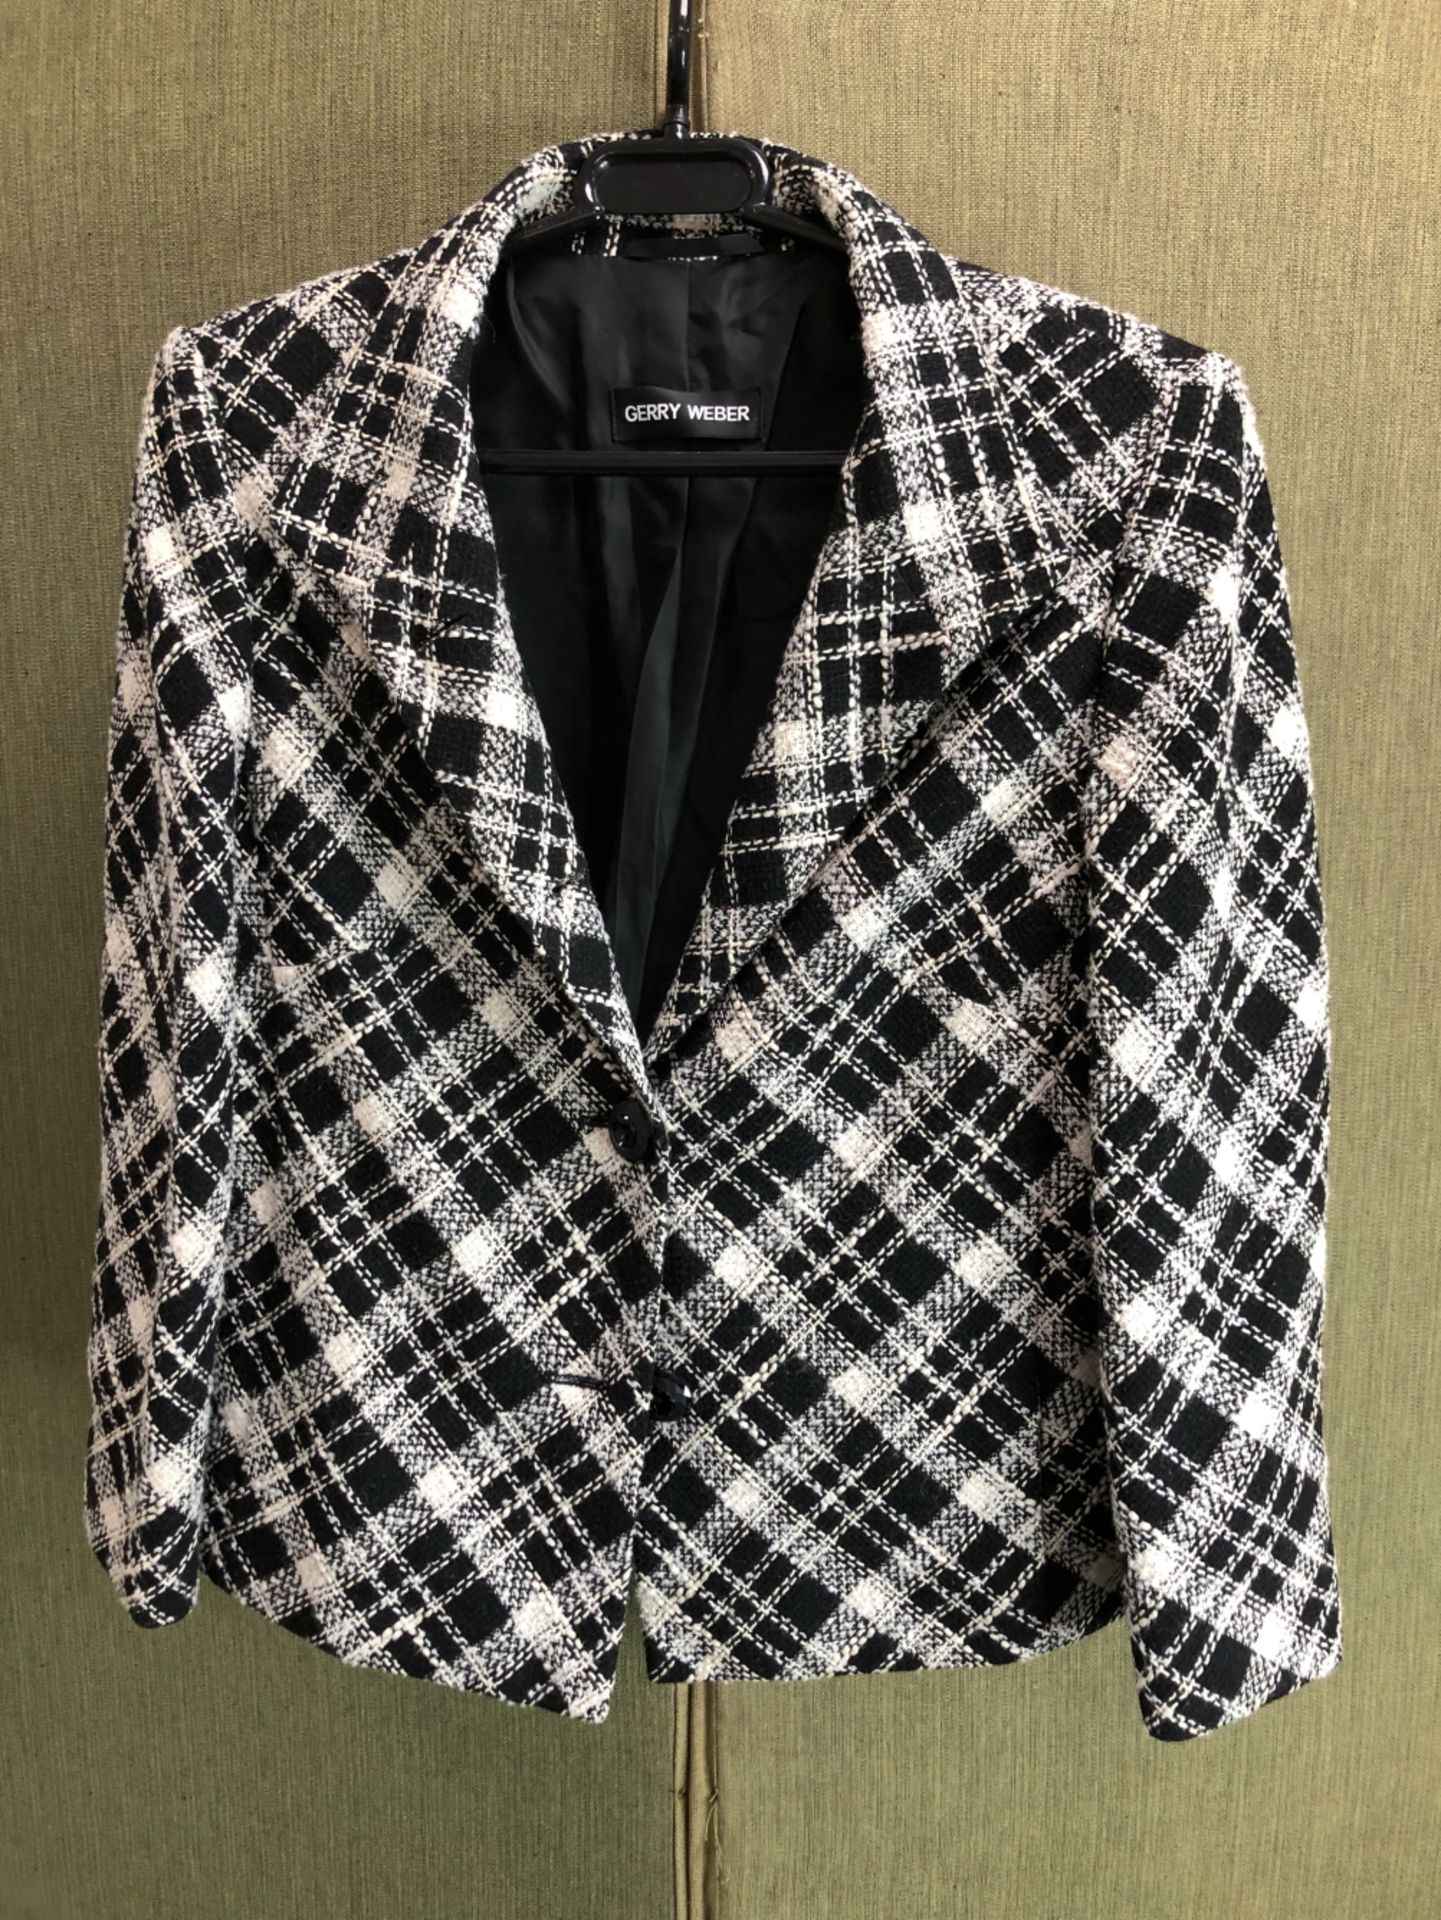 A HARDY AMIES SAVILE ROW BLACK AND WHITE TWEED SHIRT SIZE 40, TOGETHER WITH A GERRY WEBER BLACK - Image 19 of 23